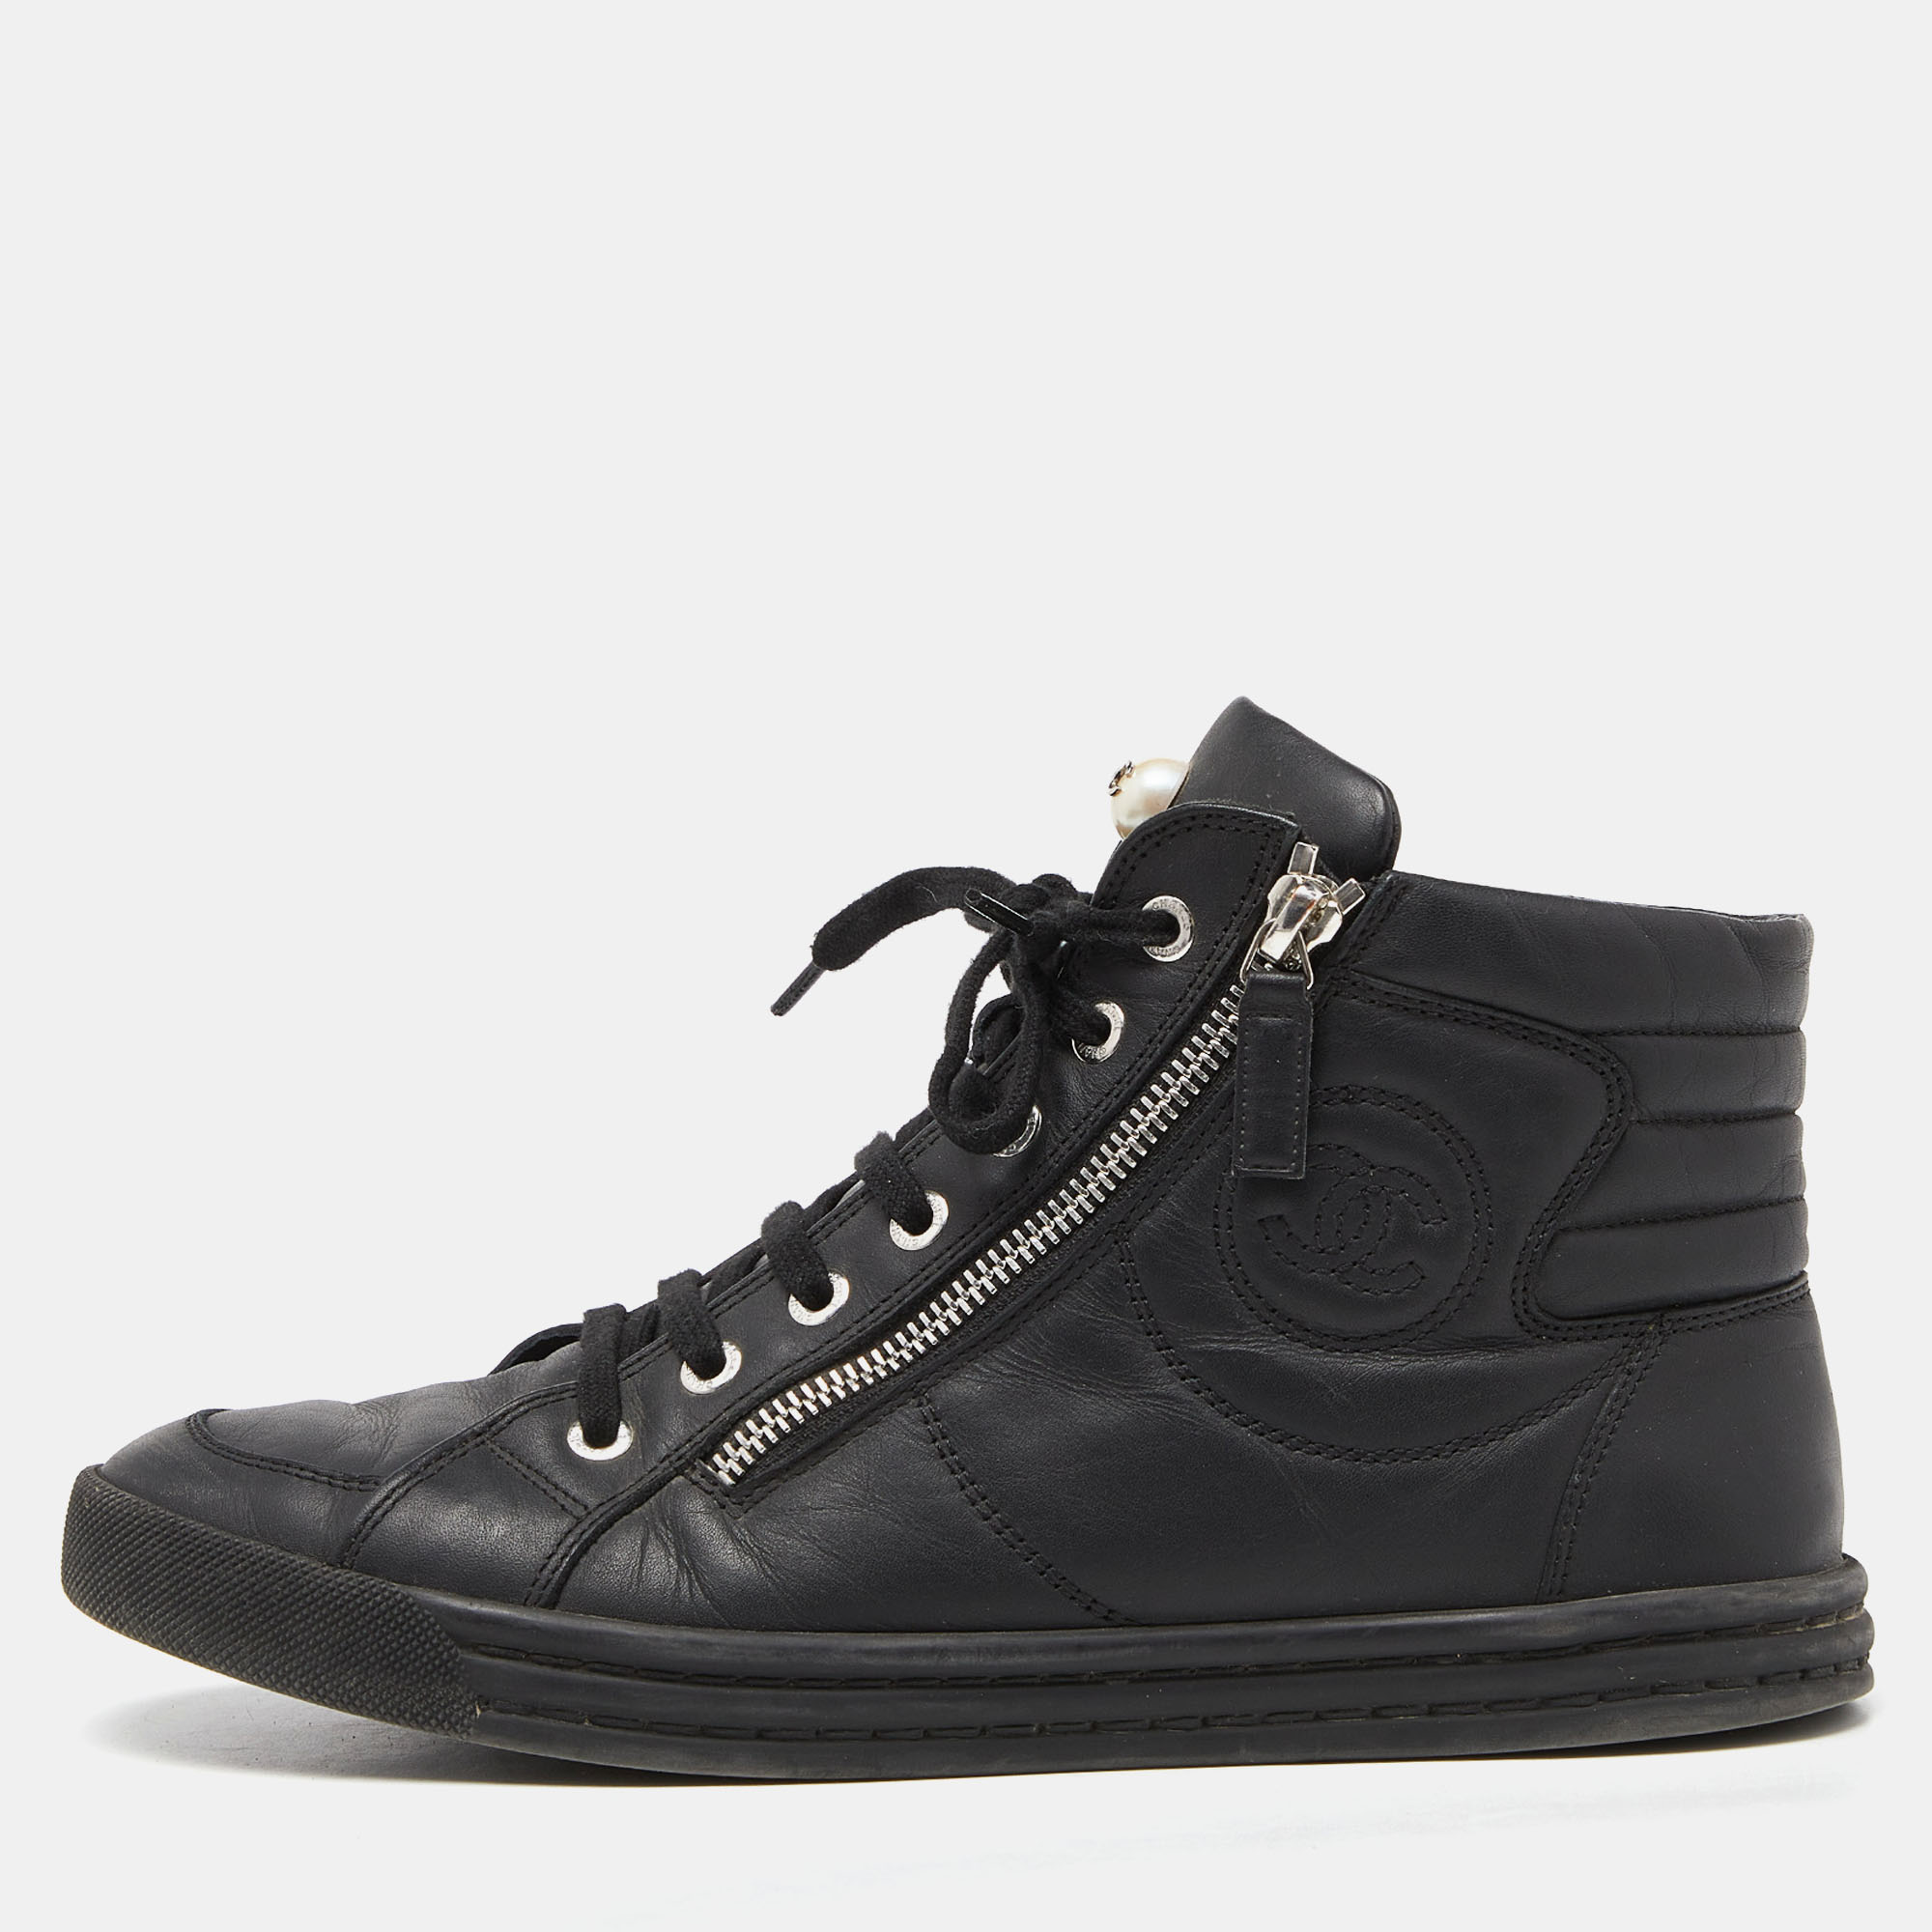 Give your outfit a chic update with this pair of Chanel black sneakers. The creation is sewn perfectly to help you make a statement in them for a long time.